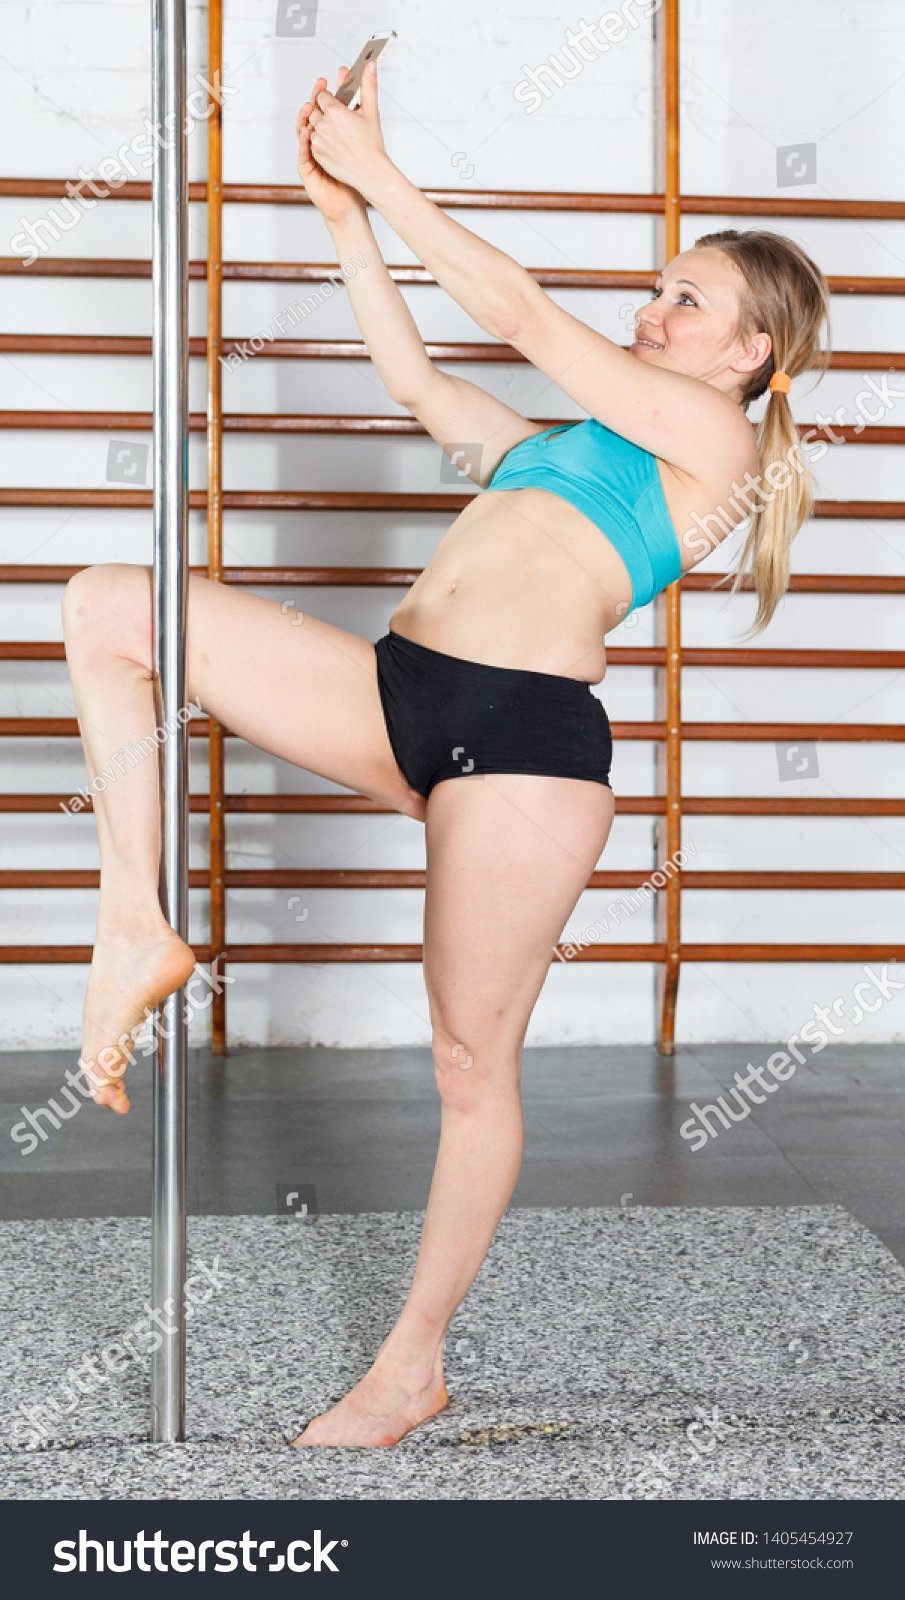 How much does a pole dancer make